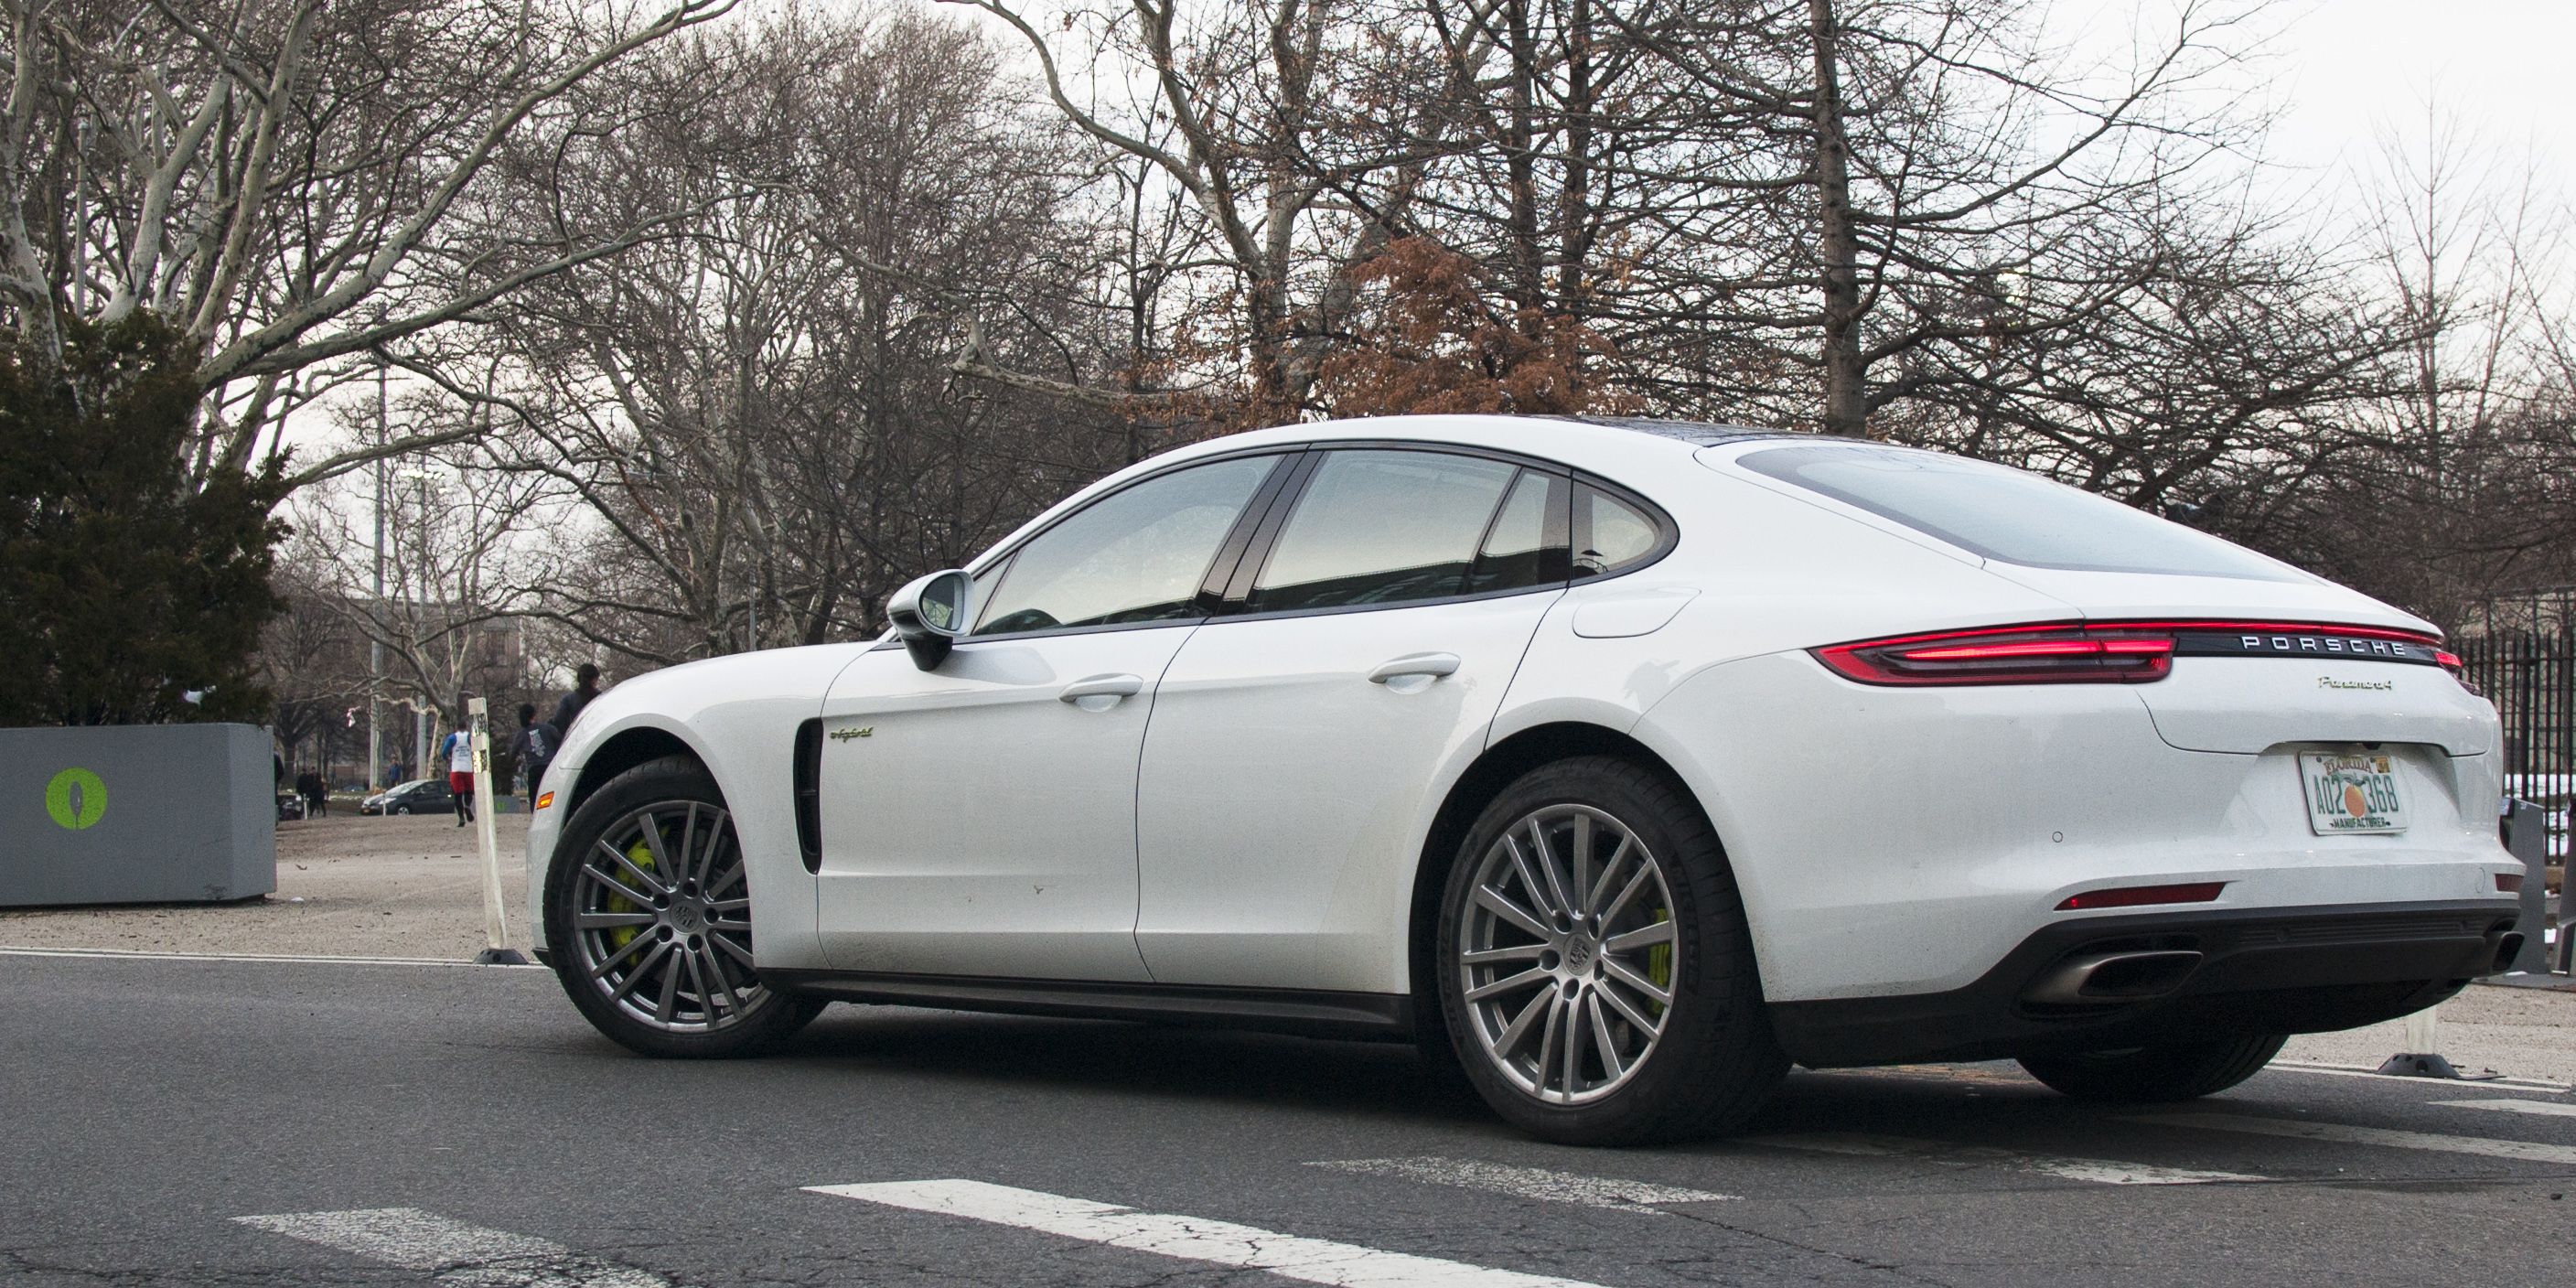 The 2018 Porsche Panamera 4 E-Hybrid Is a Car of the Moment